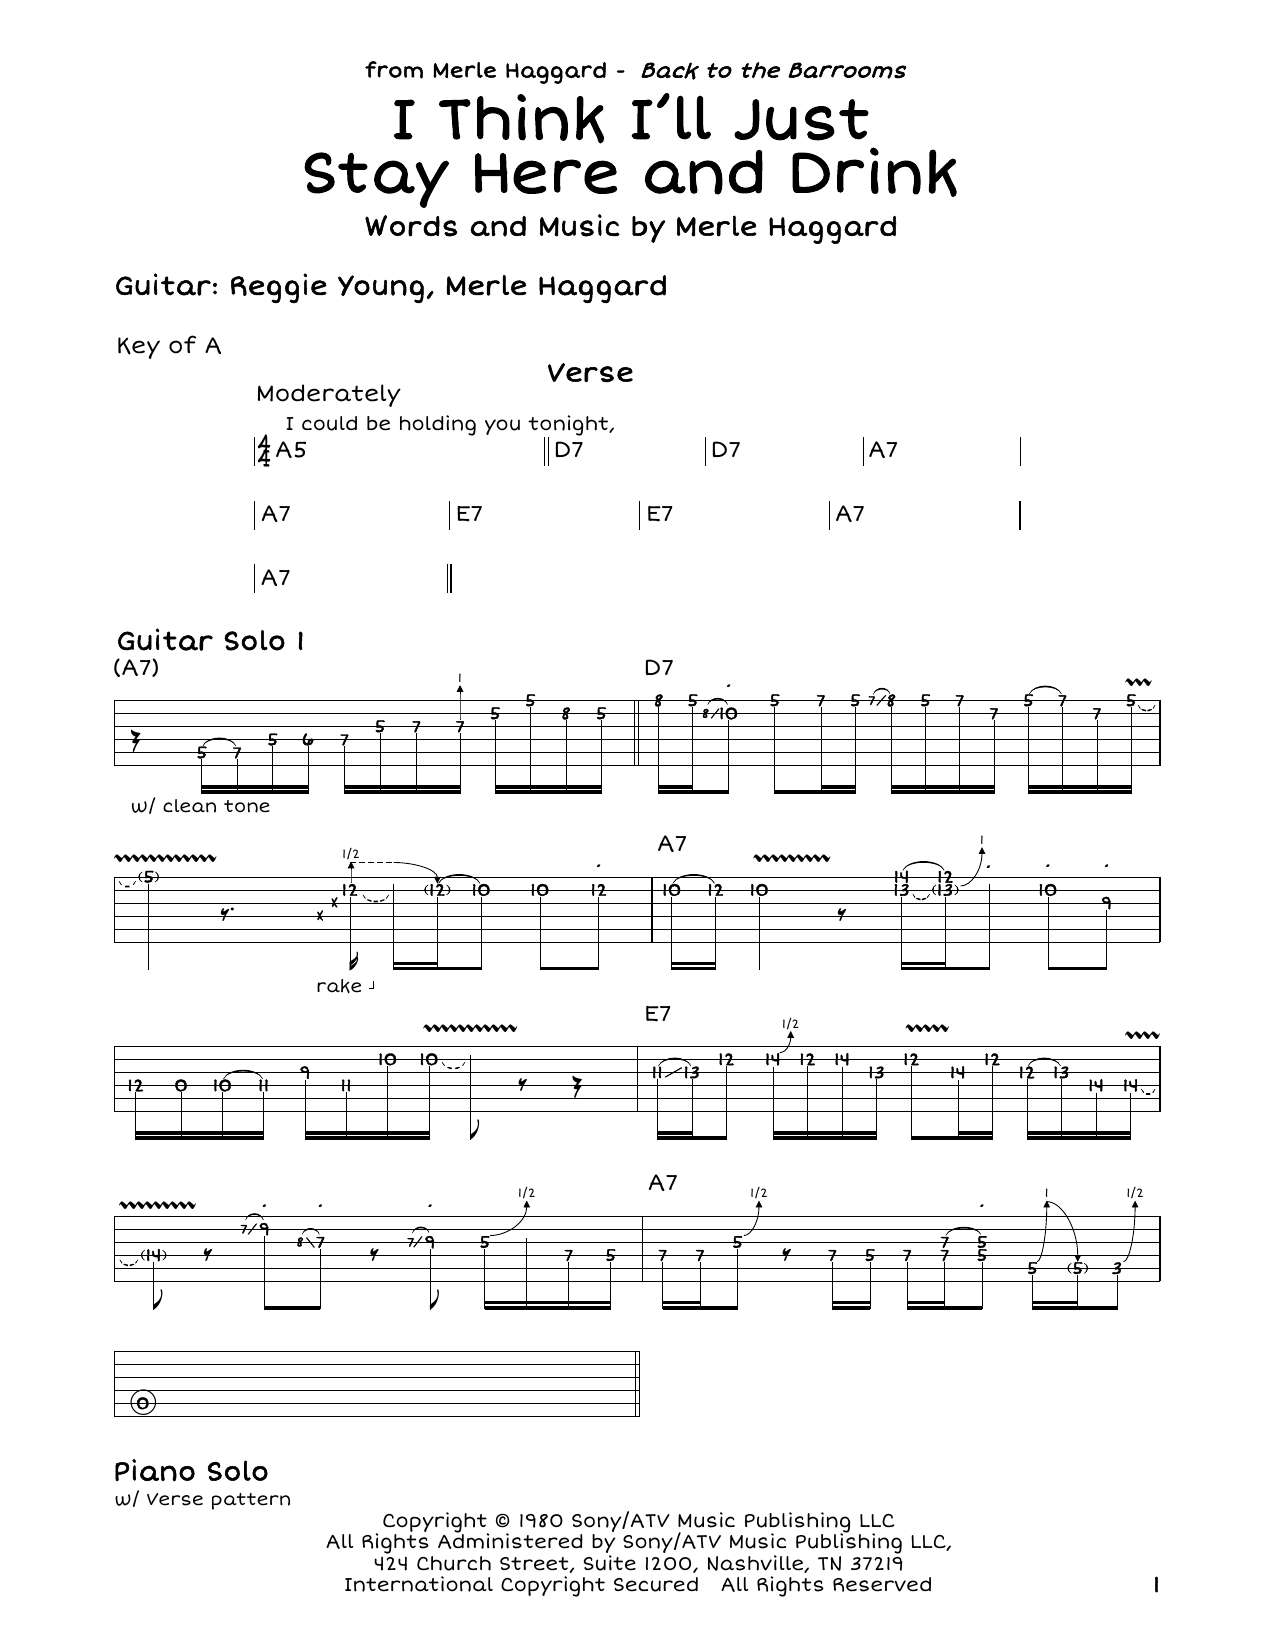 Download Merle Haggard I Think I'll Just Stay Here And Drink Sheet Music